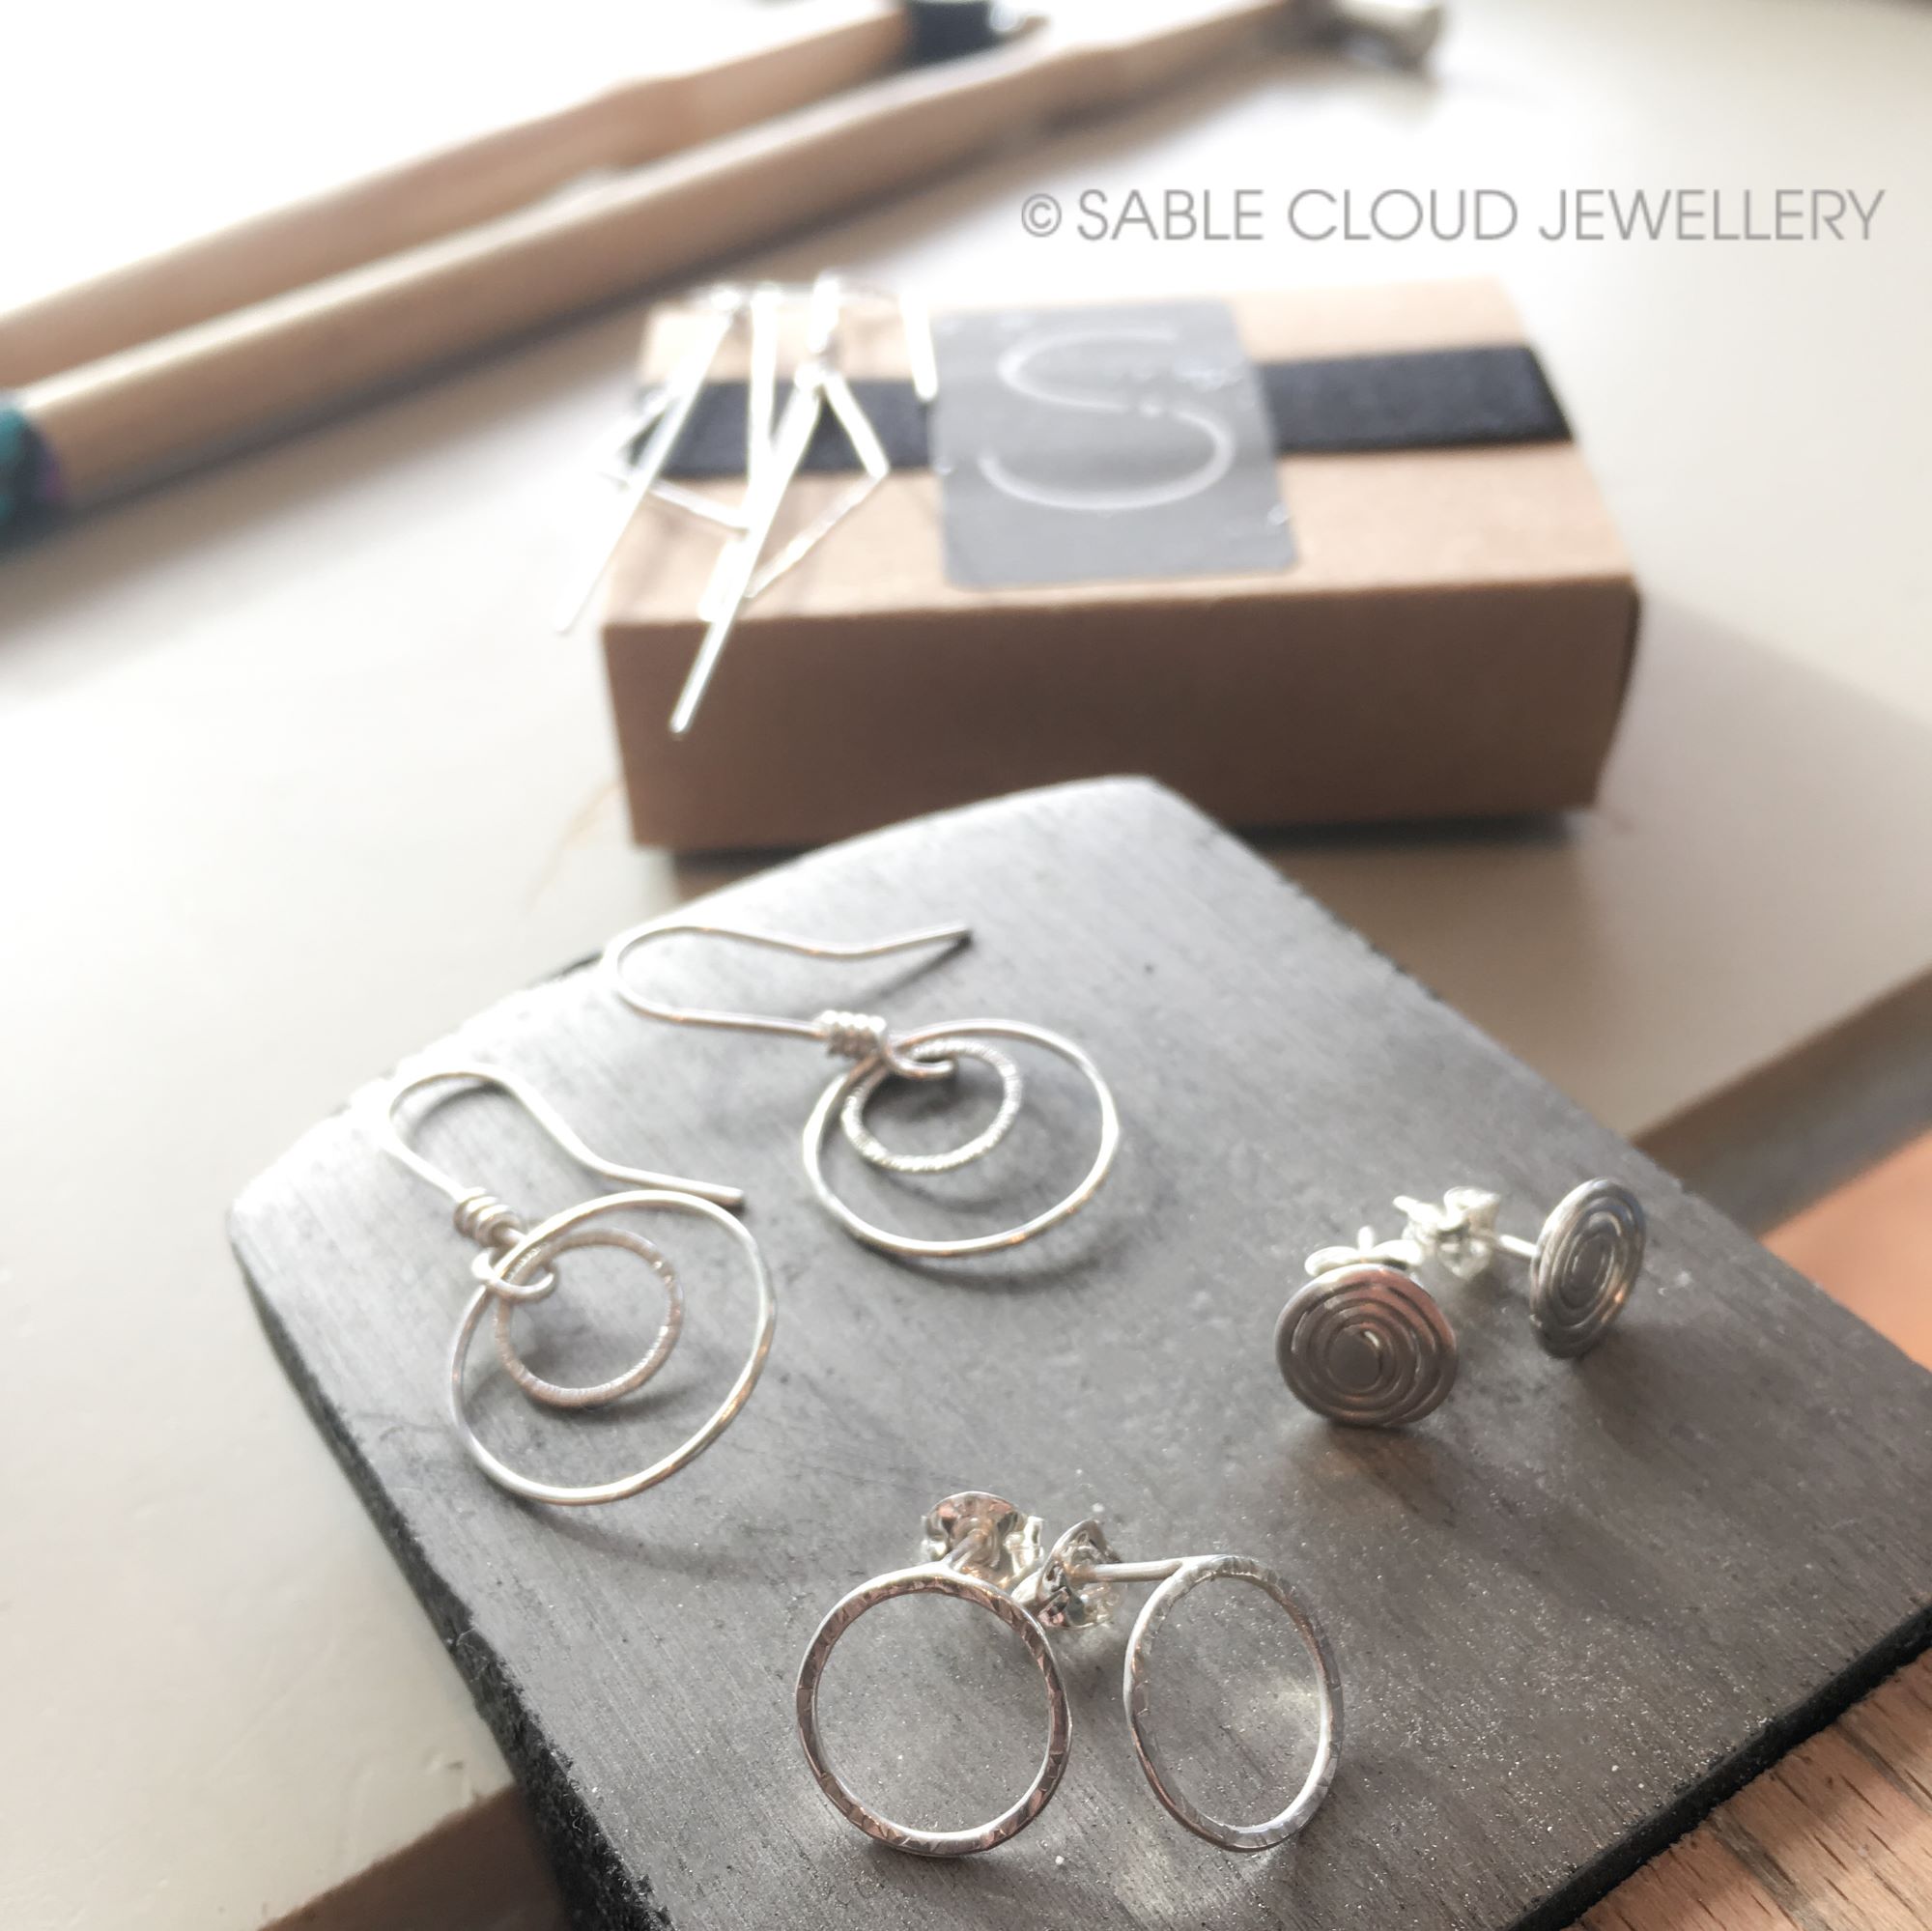 Click here to book an earring making workshop